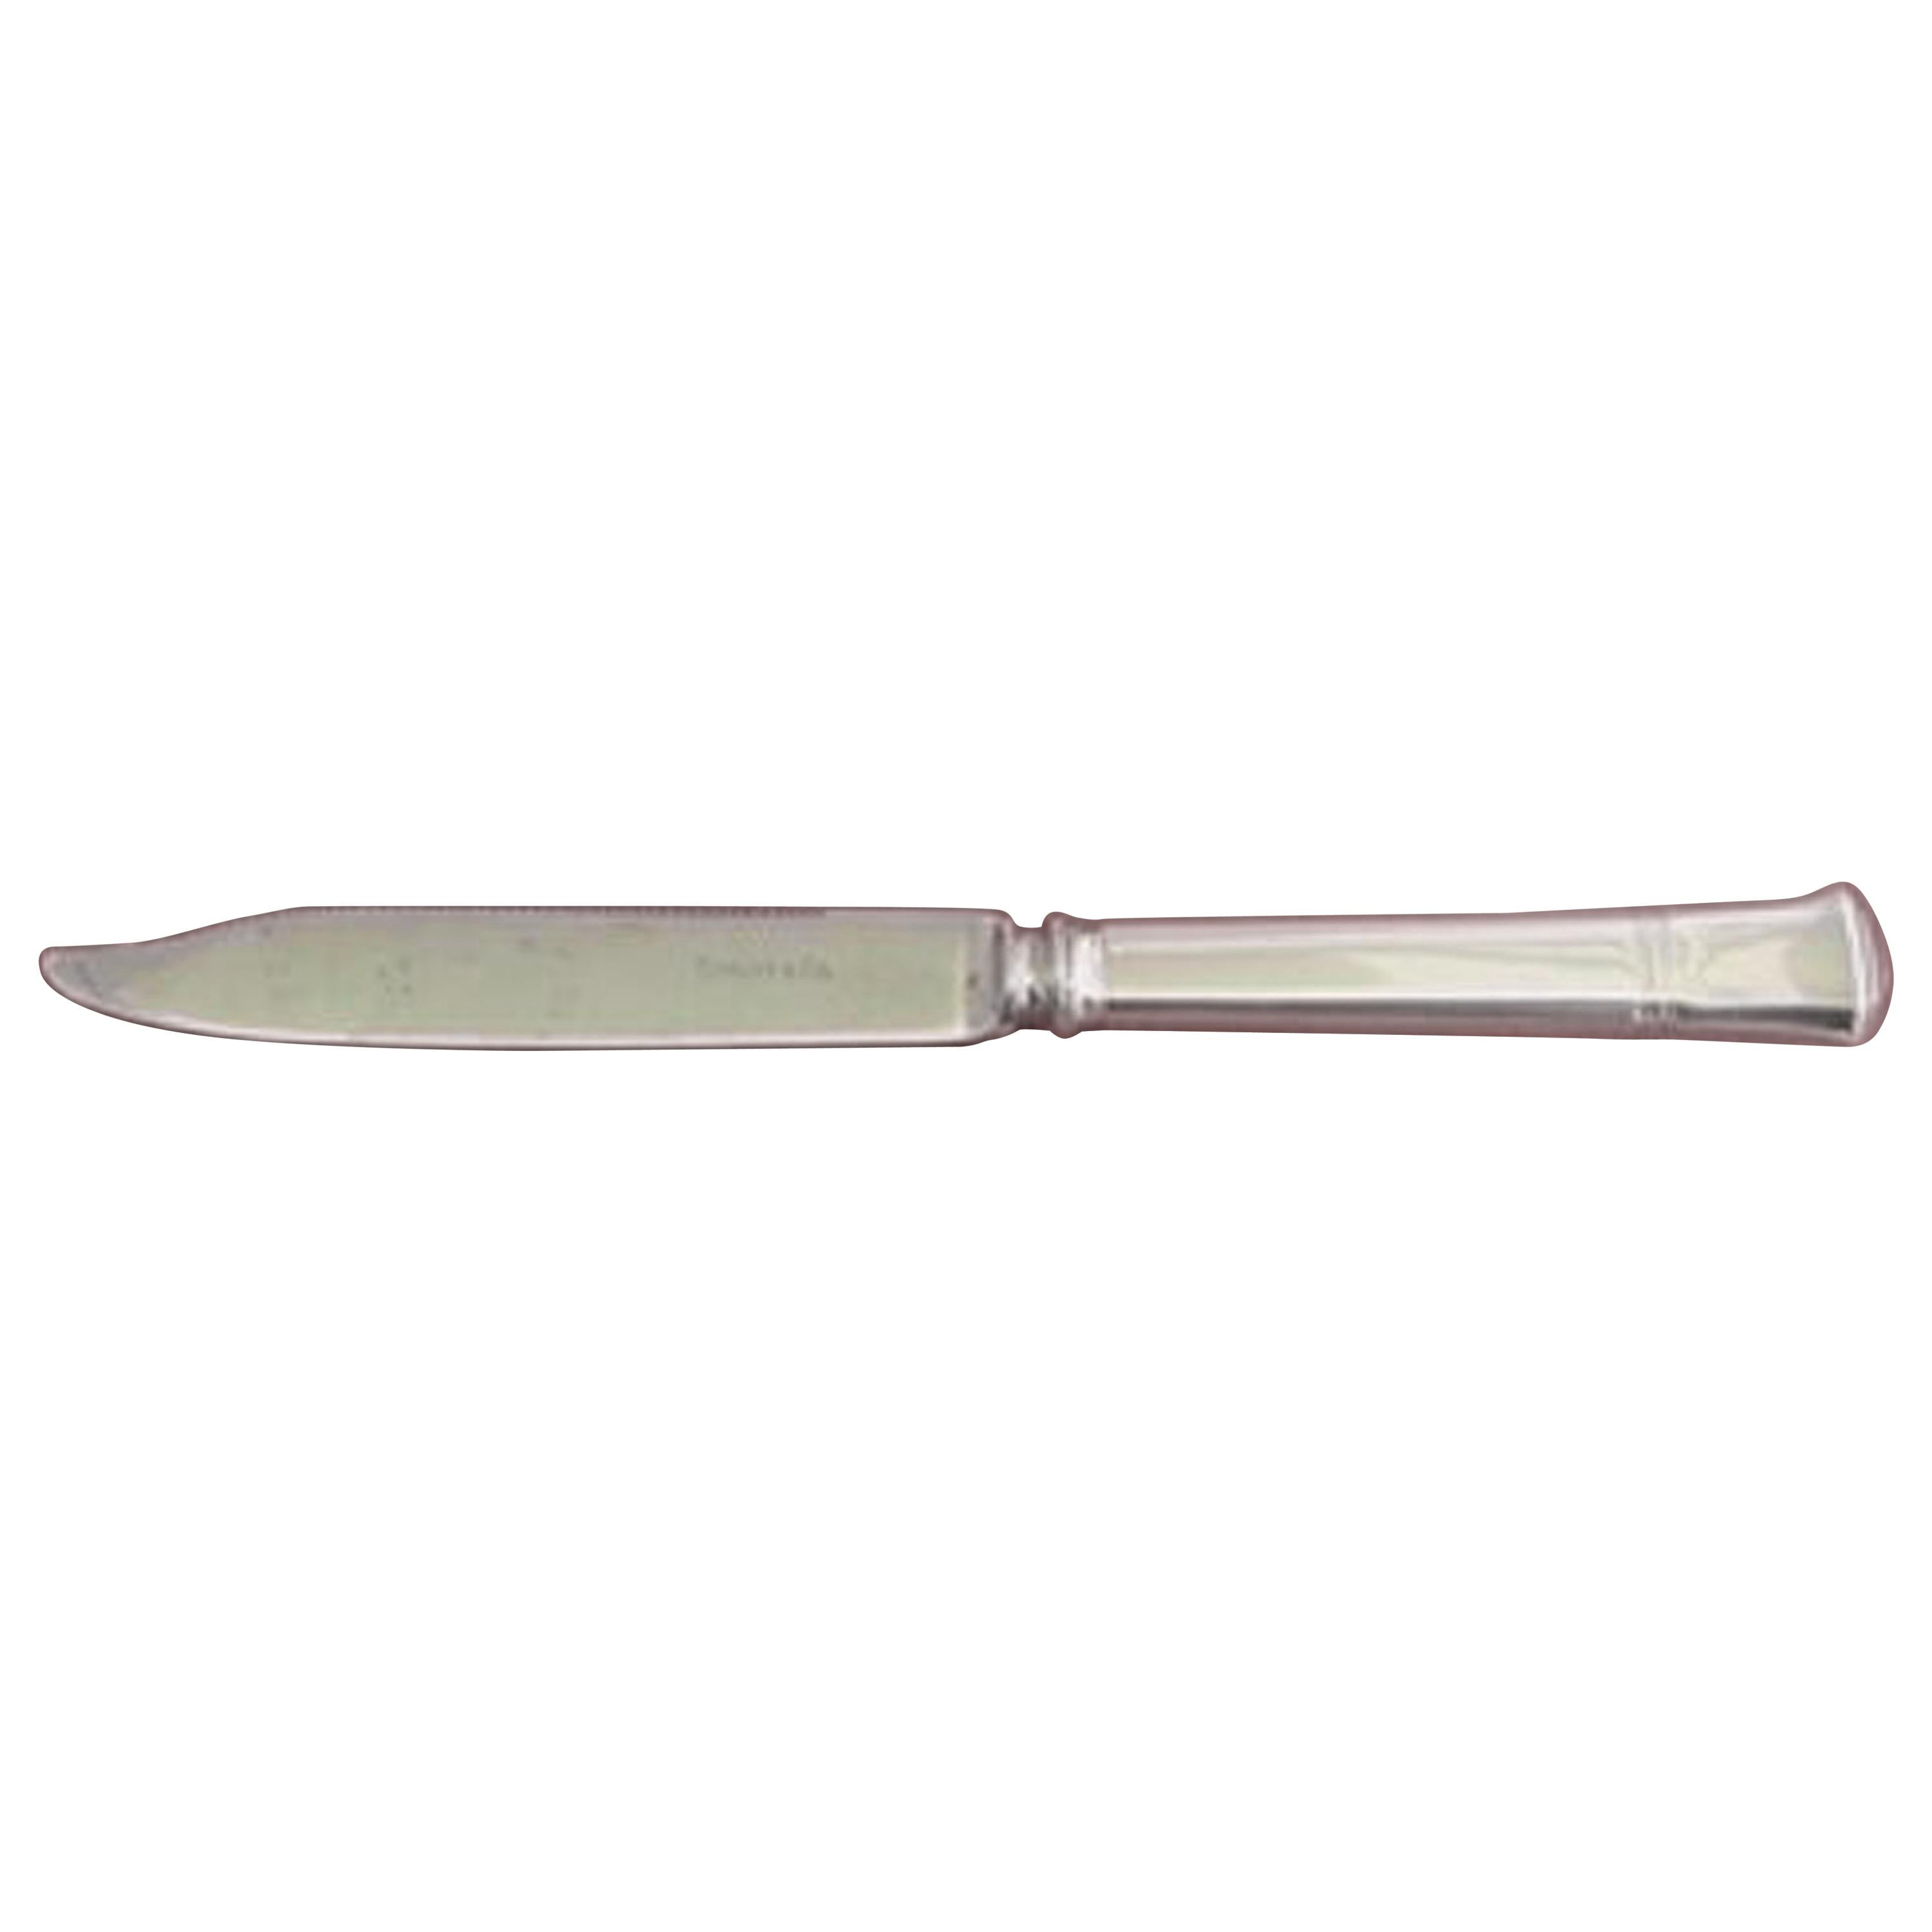 Windham by Tiffany & Co. Sterling Silver Fruit Knife Serrated